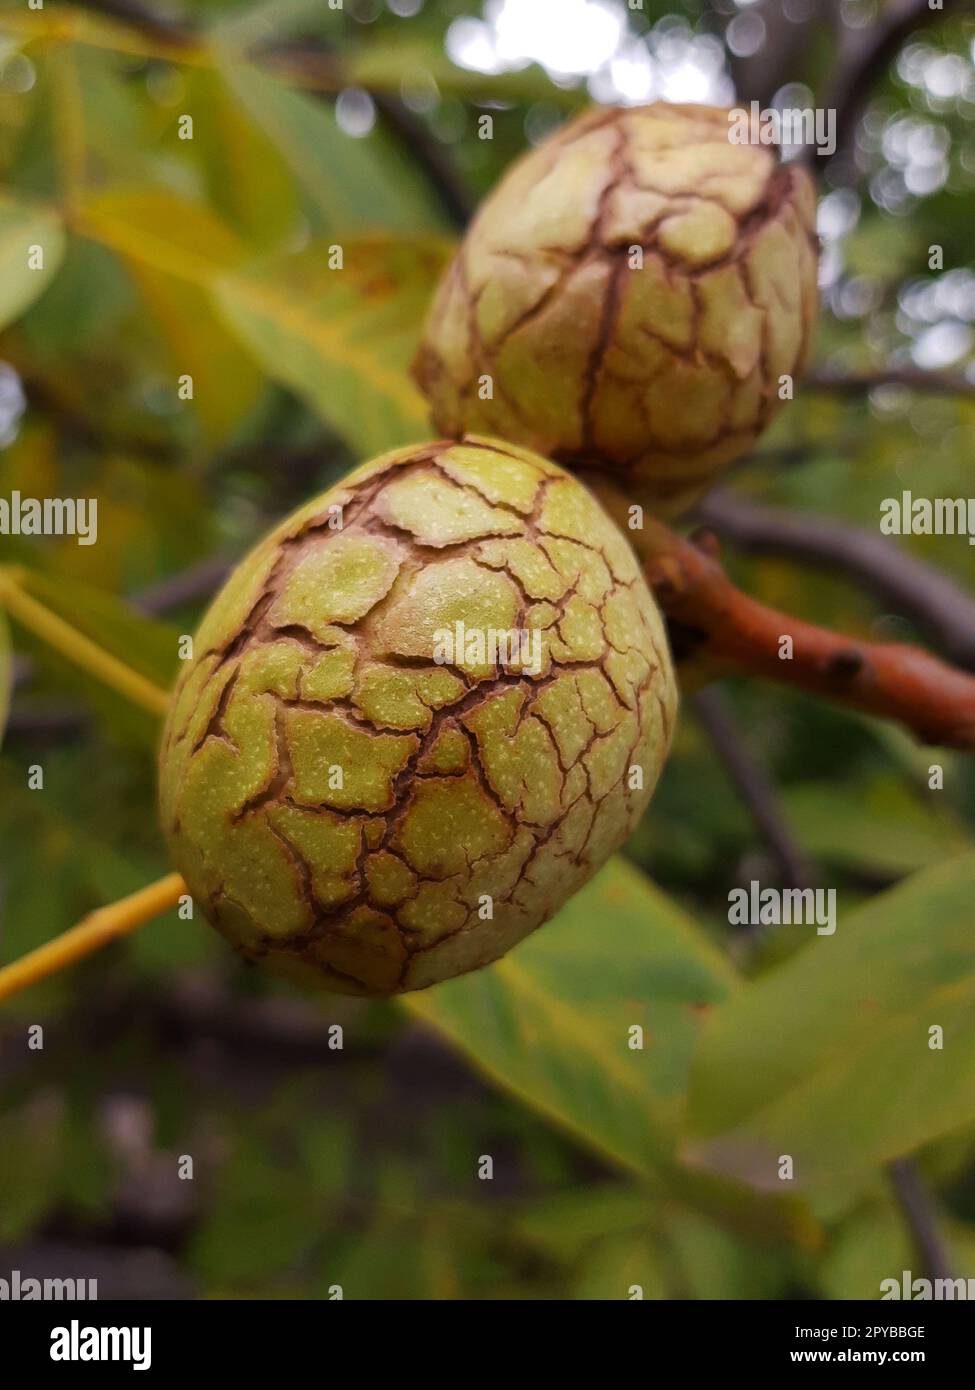 Walnut in green shell close up Stock Photo